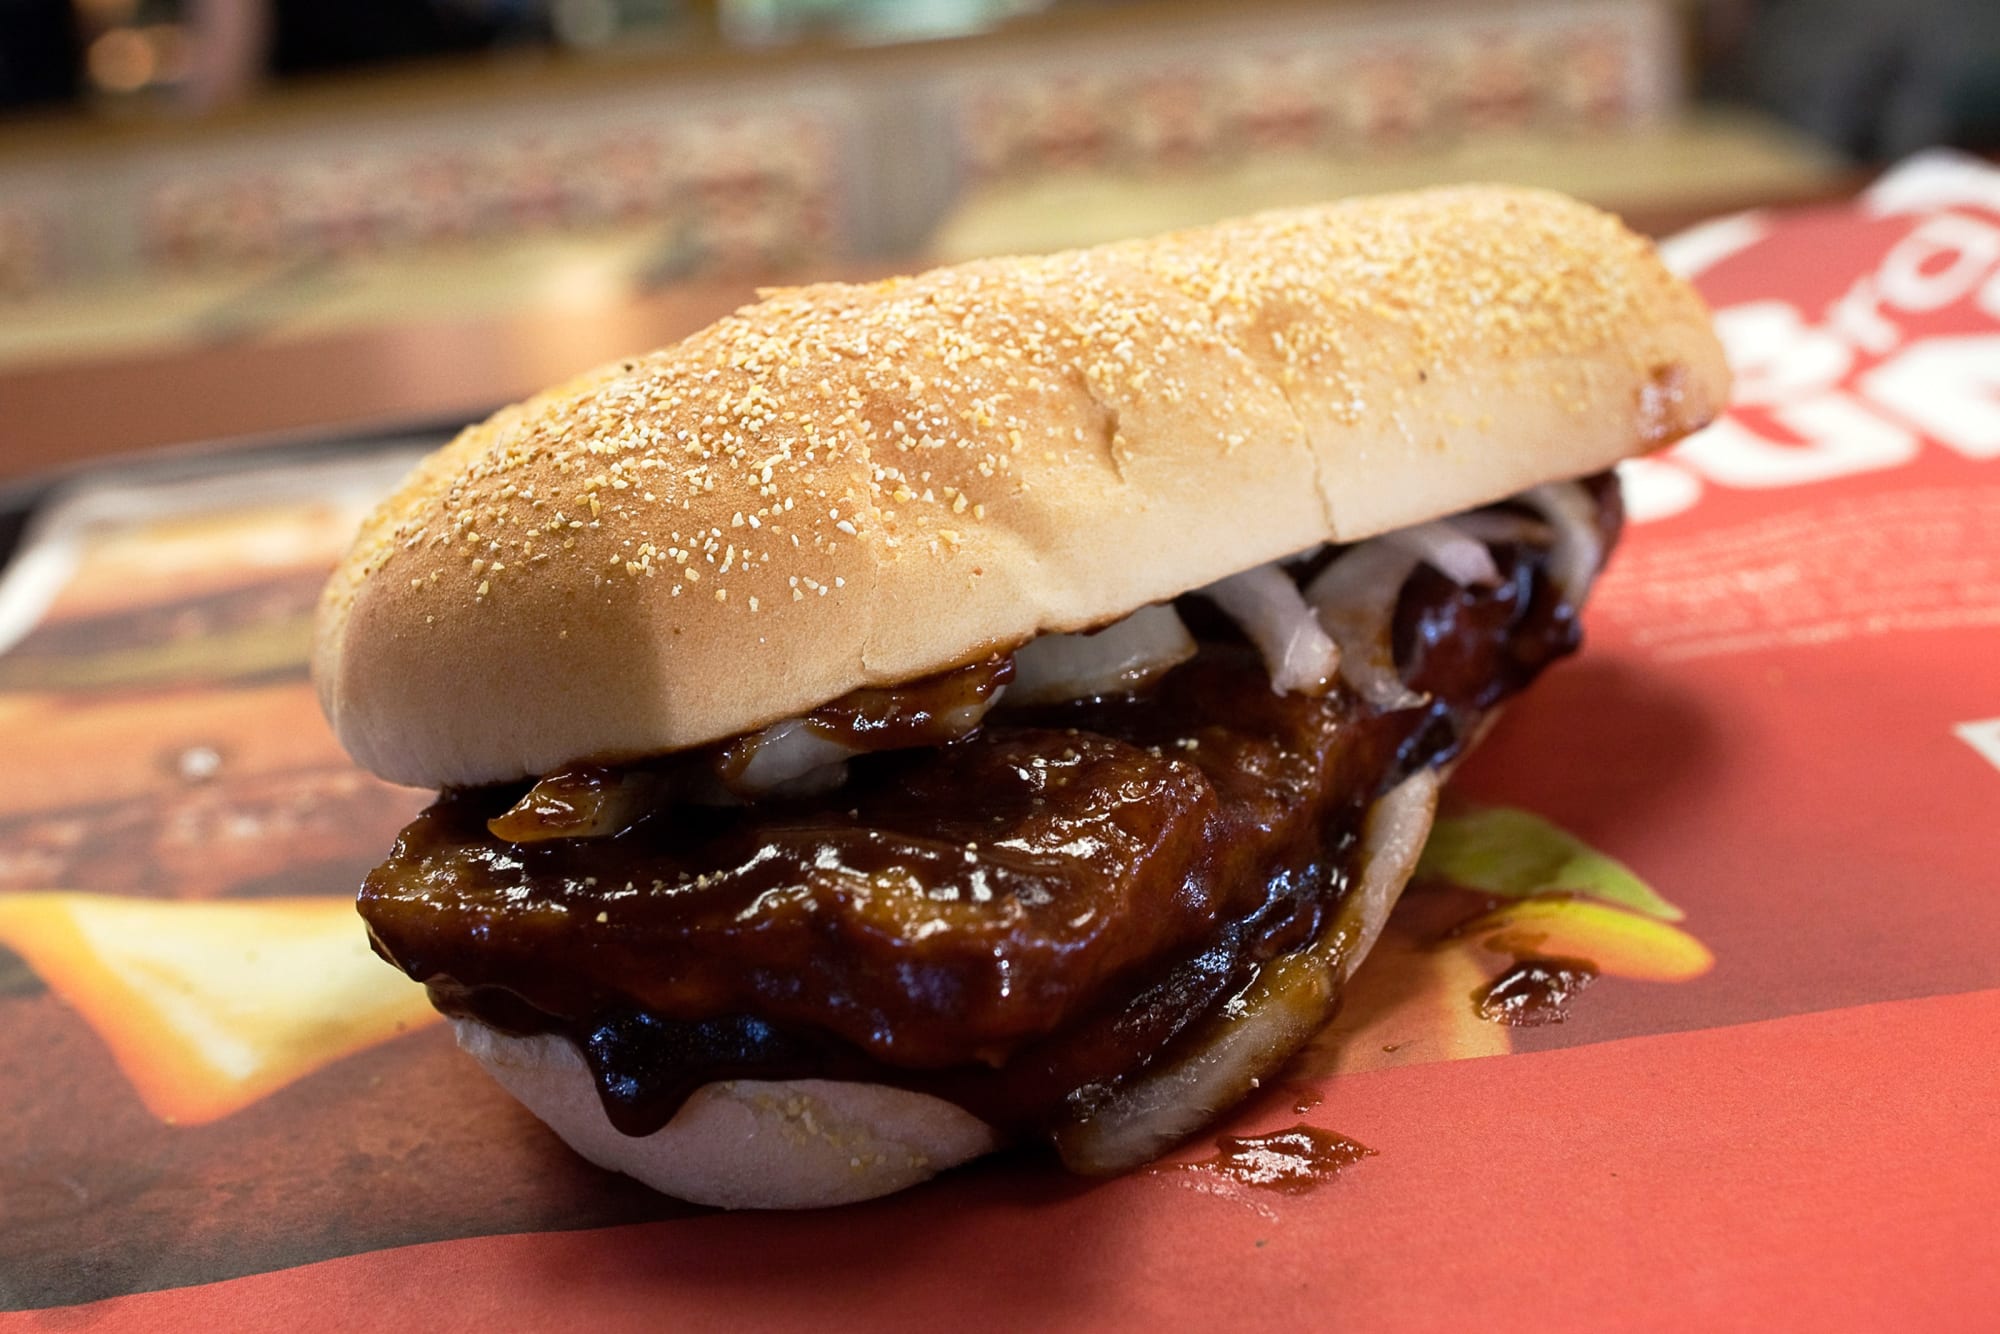 McDonald's has revealed that the McRib is coming back